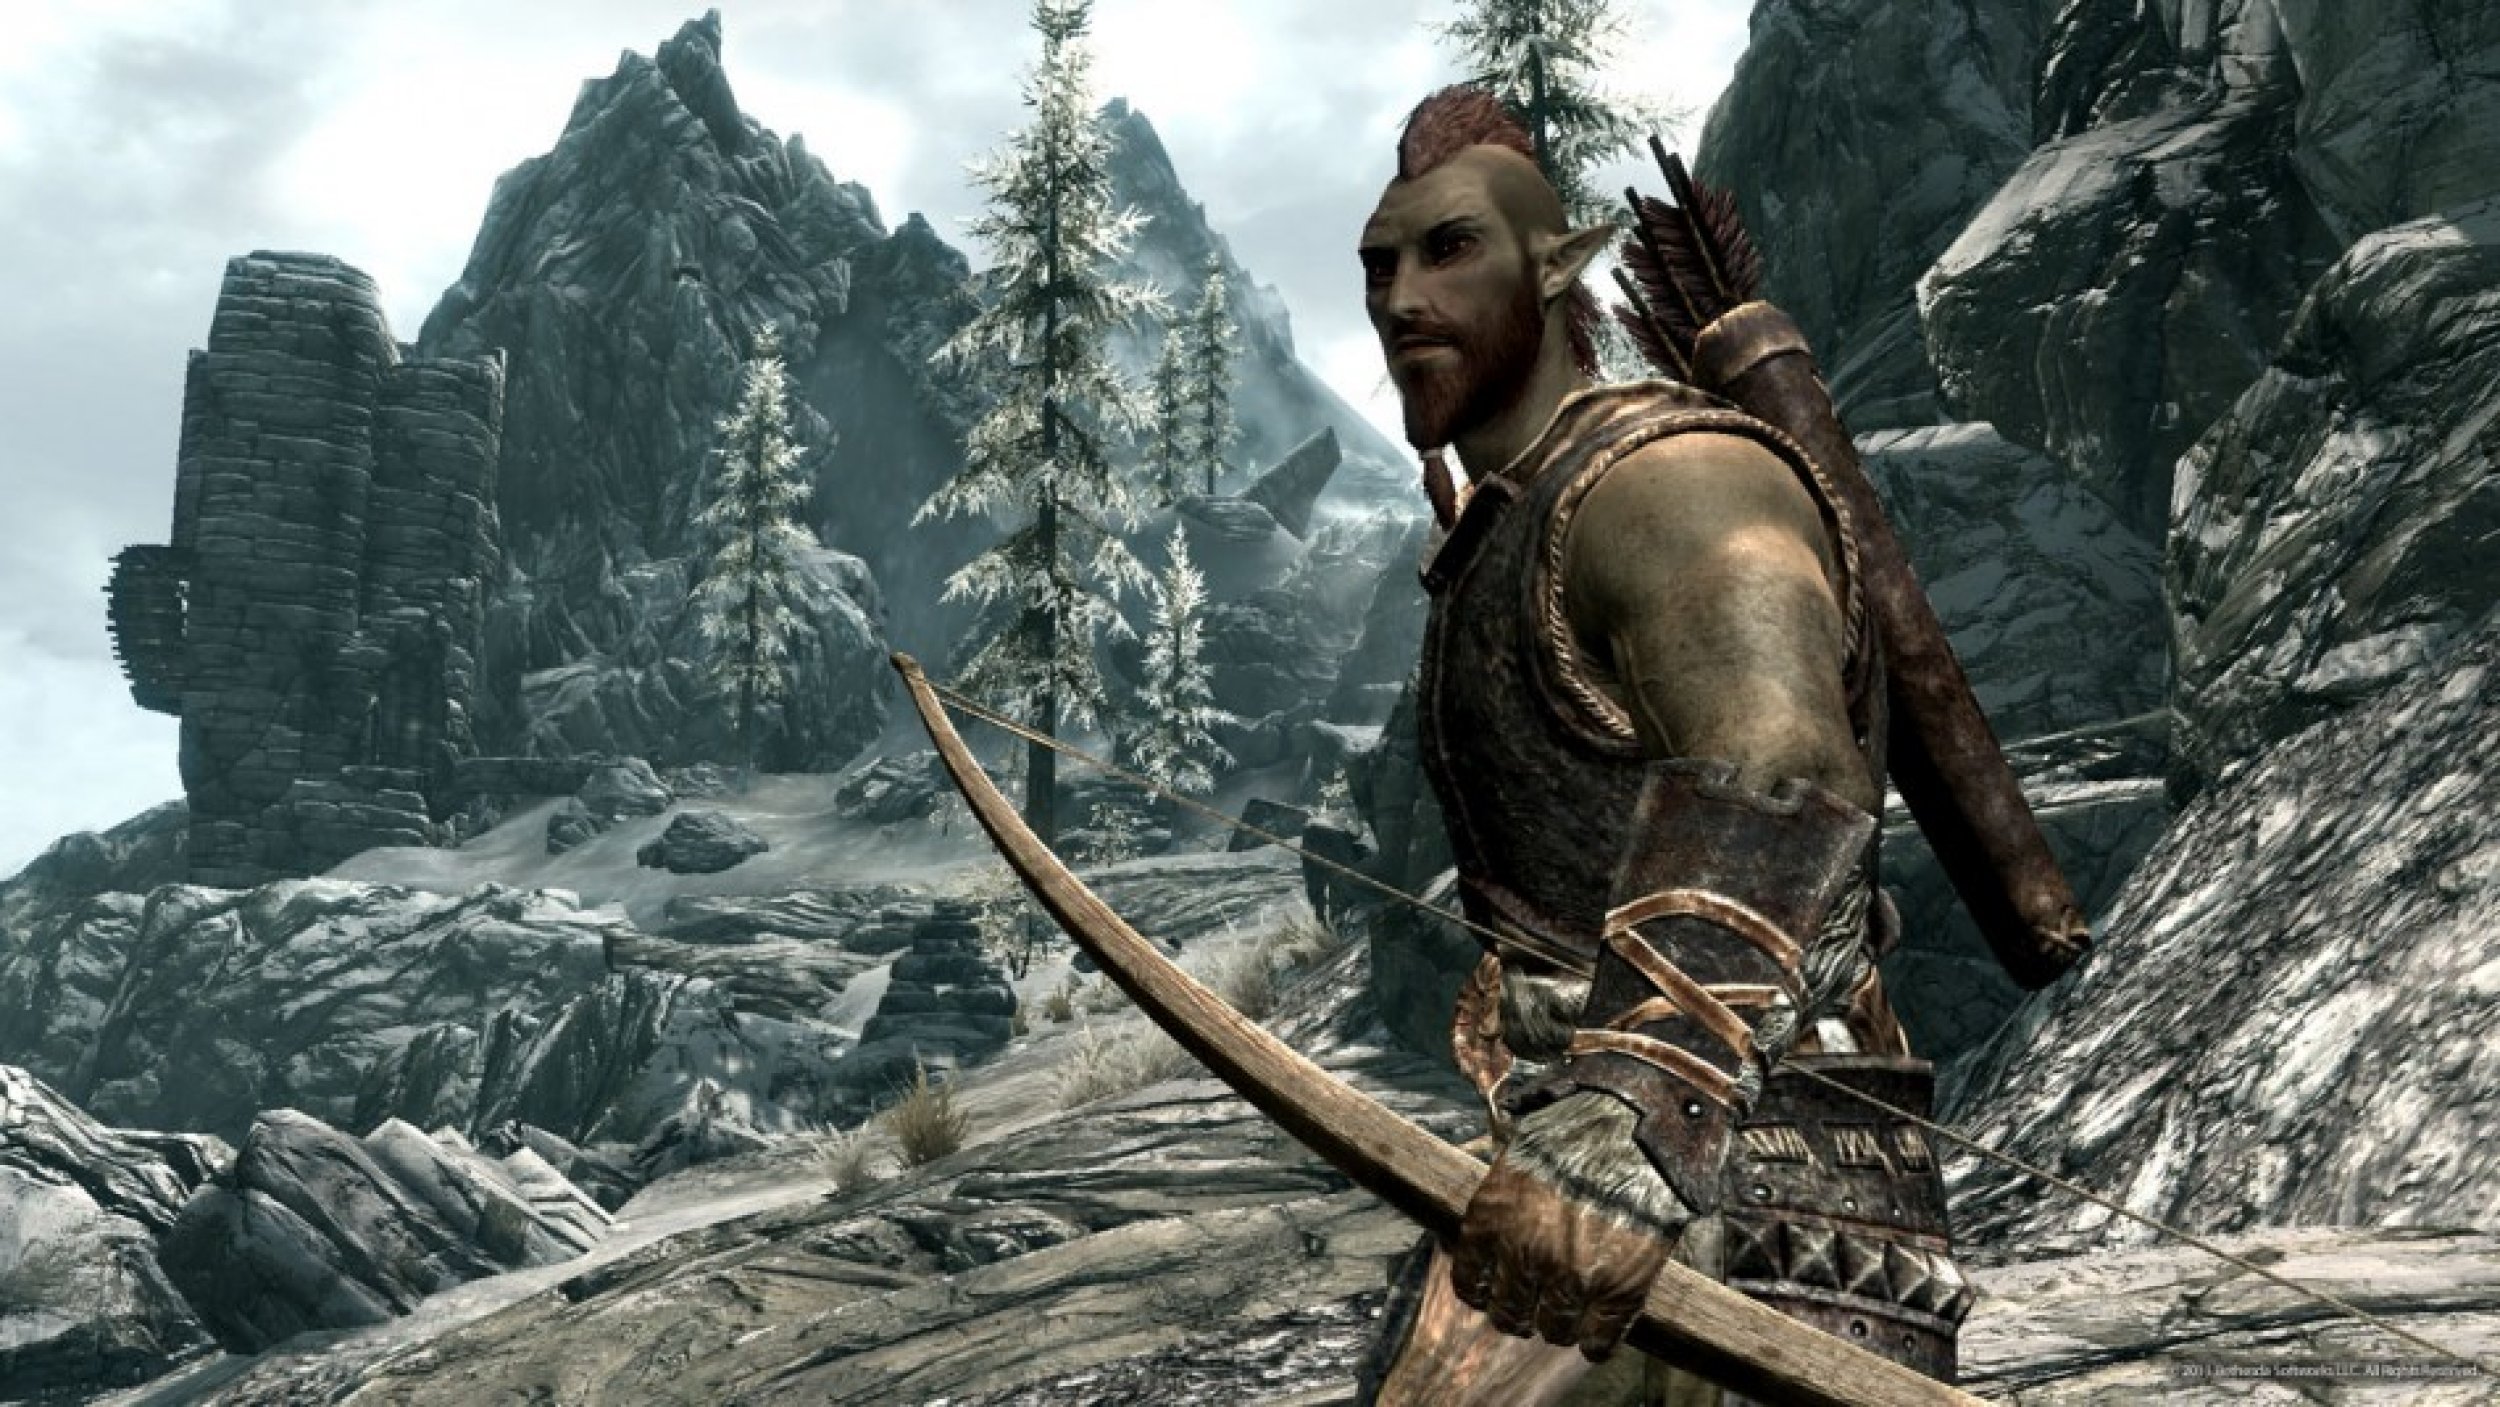 When Will 039Skyrim039 DLC Come Out 5 Things Players Should Do While They Wait